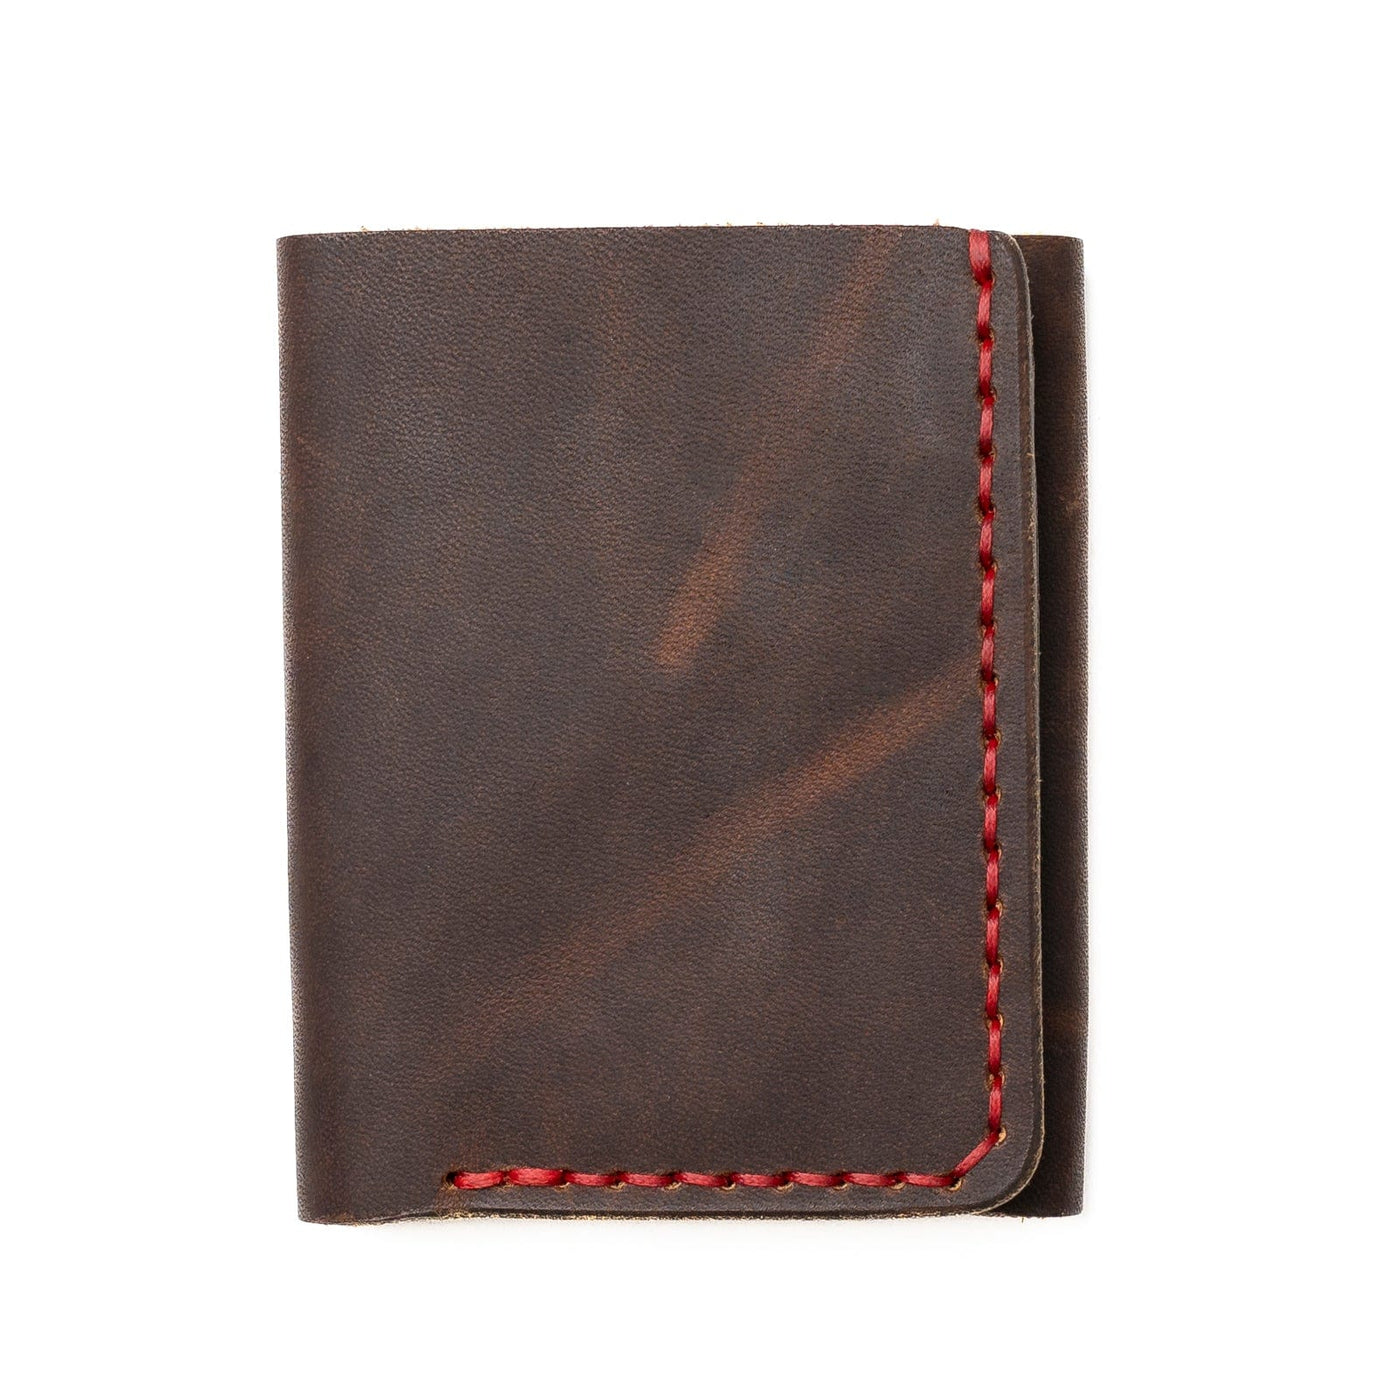 Heritage Brown Leather Trifold Wallet: Stylish and Functional - Popov  Leather®